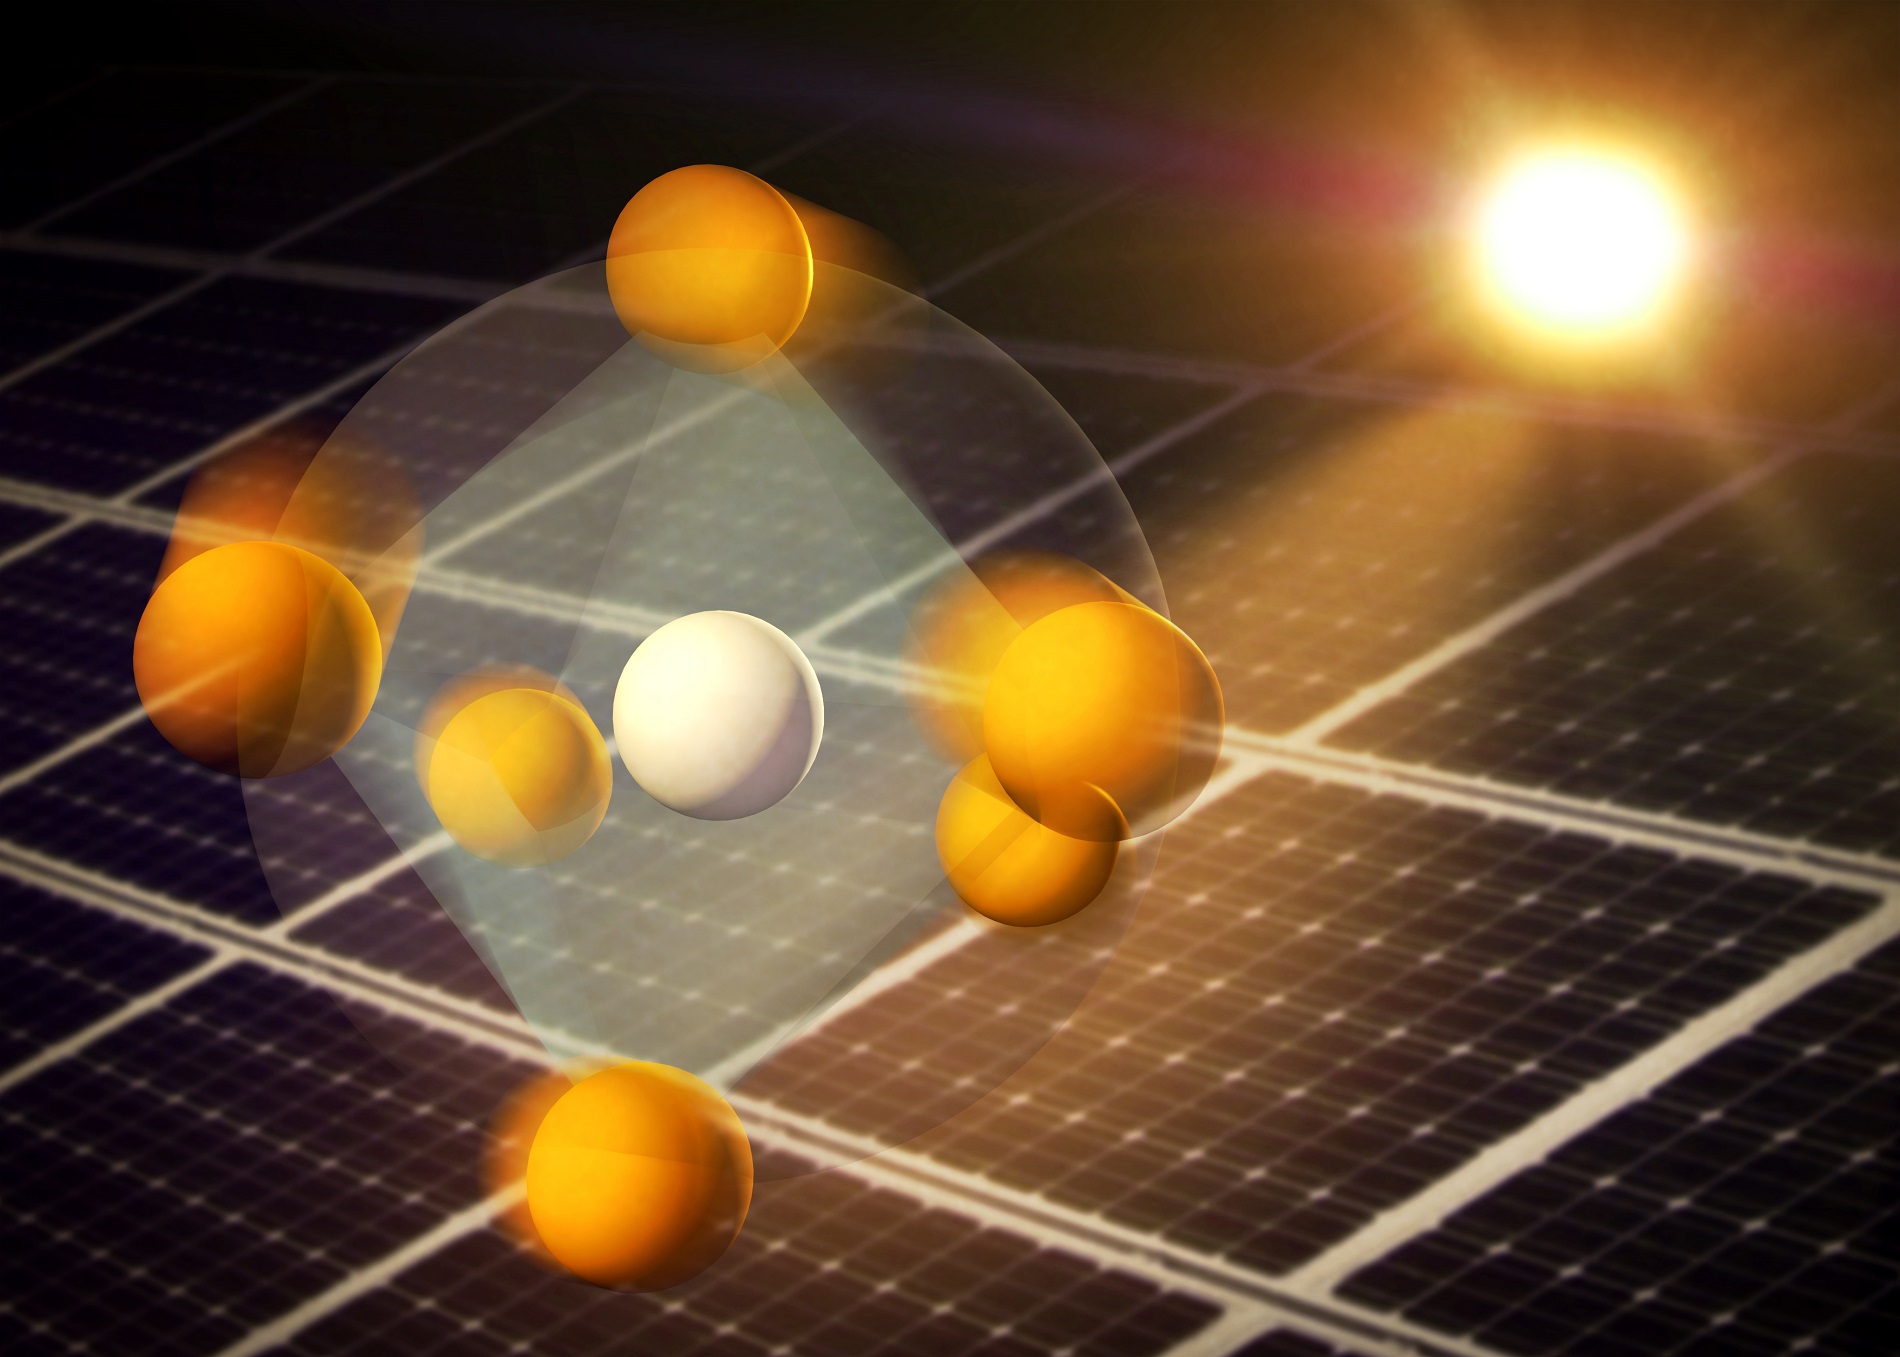 According to a new SLAC study, atoms in perovskites respond to light with unusual rotational motions and distortions that could explain the high efficiency of these next-generation solar cell materials.